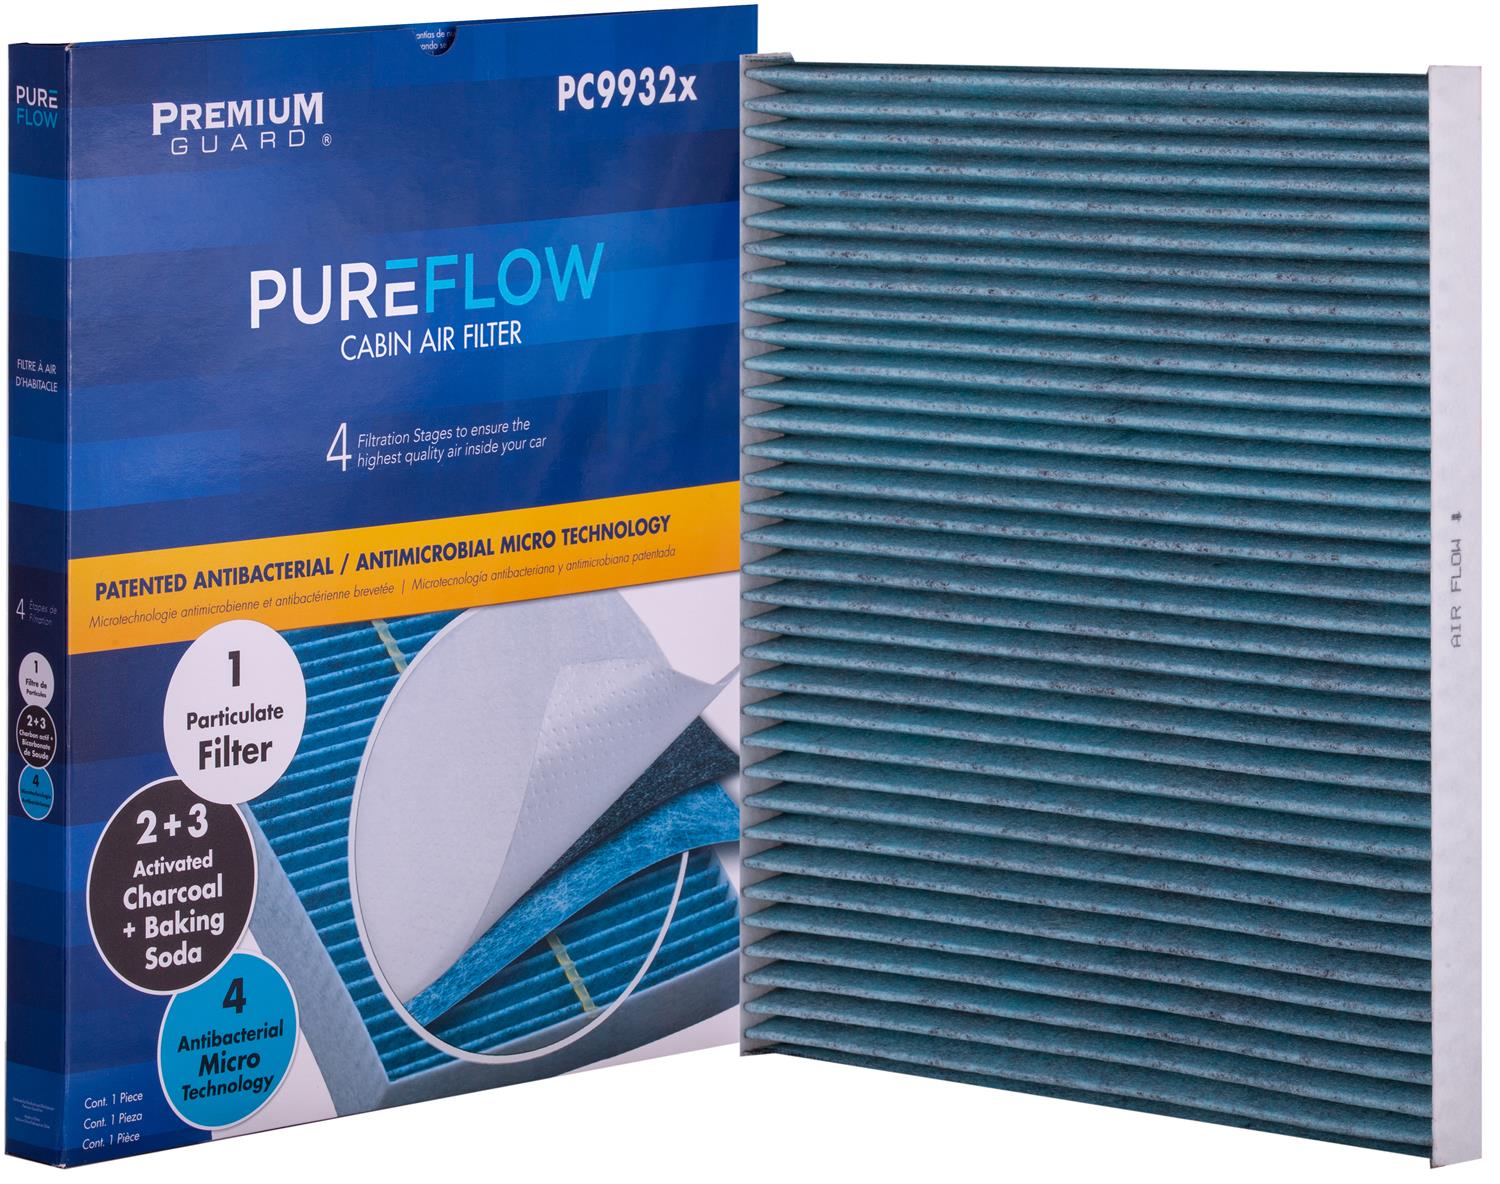 PUREFLOW 2019 Nissan Pathfinder Cabin Air Filter with Antibacterial Technology, PC9932X